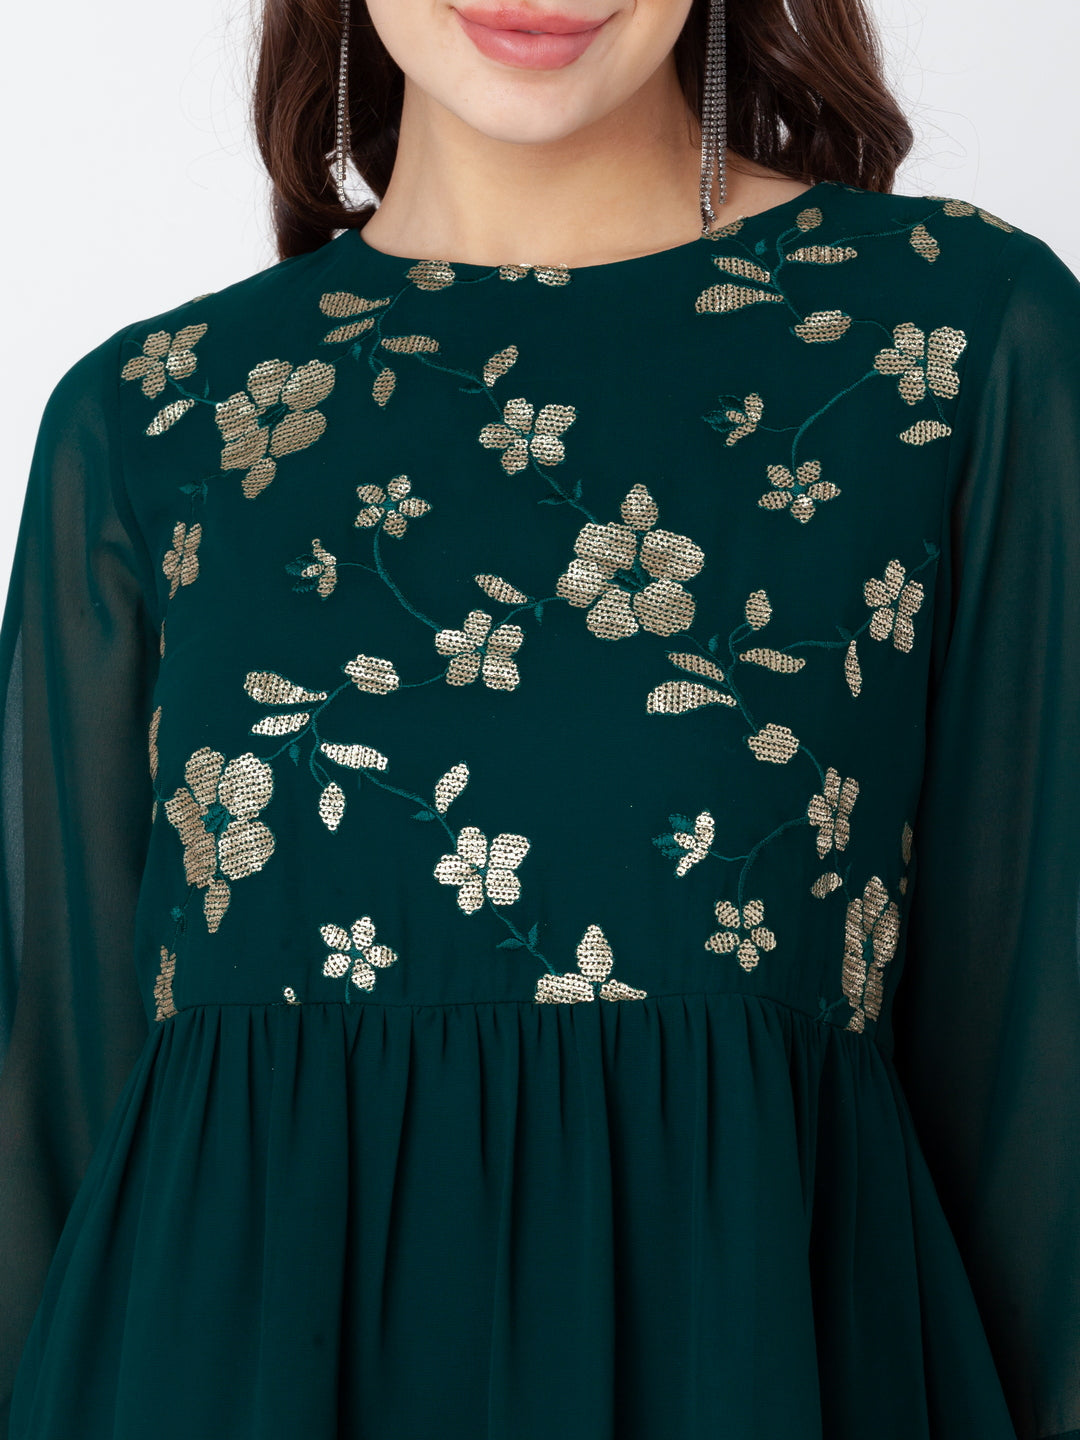 Green_Embroidered_Regular_Top_6